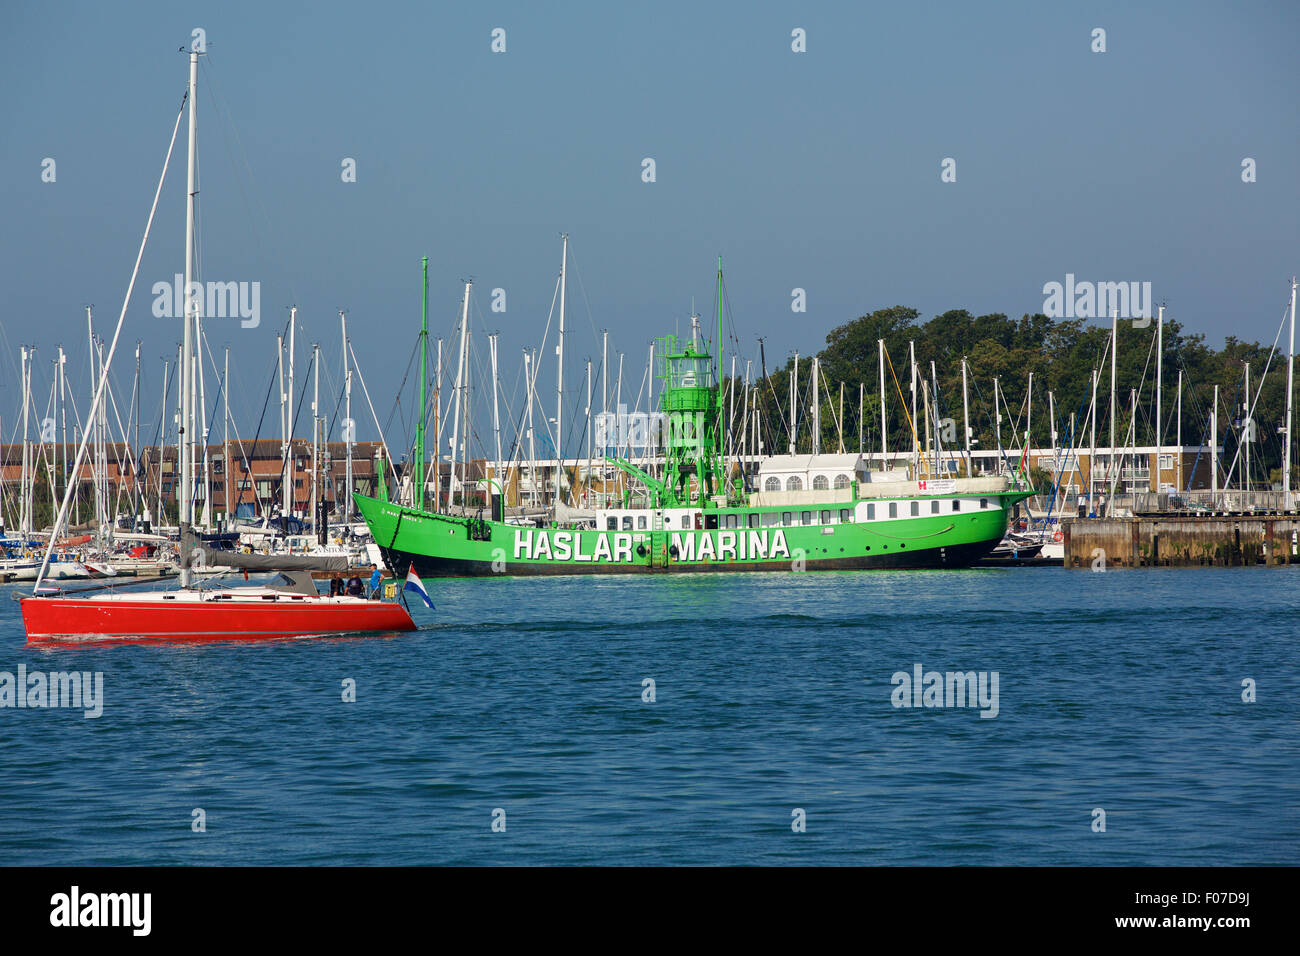 Renovated light ship moored in Haslar Marina Gosport. Many moored yachts behind and a yacht underway in the foreground. Stock Photo